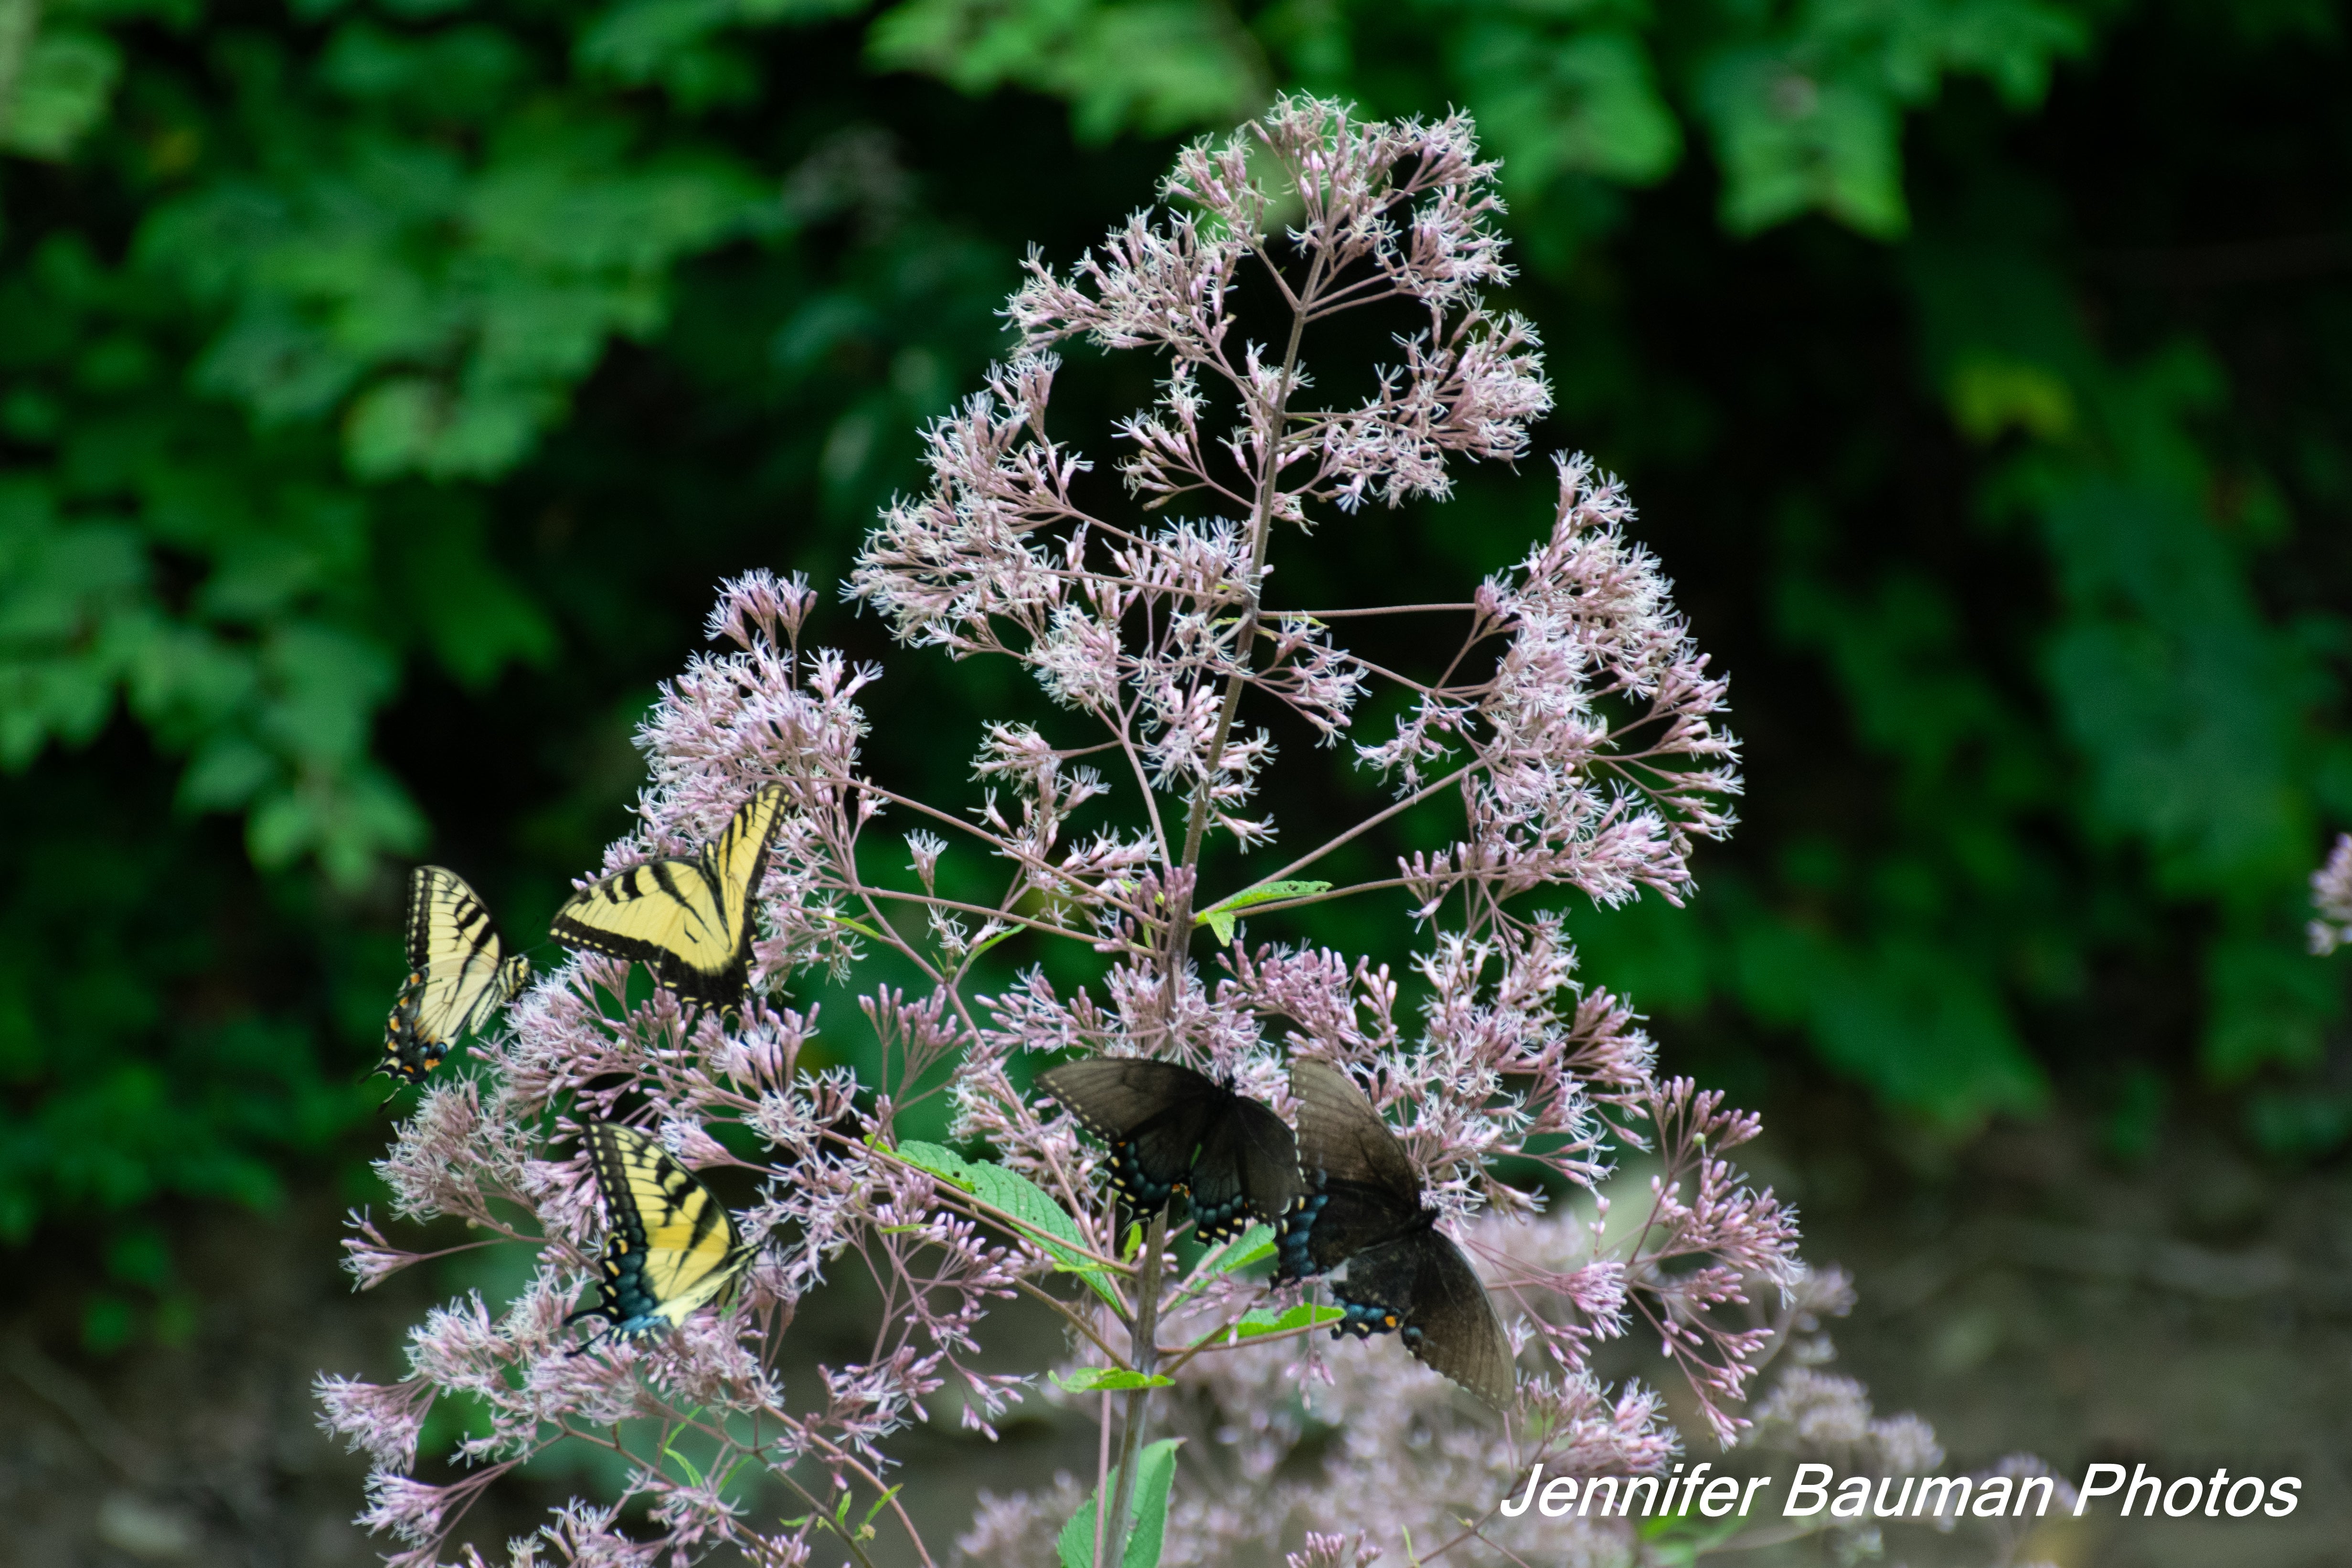 Butterfly-covered Joe Pye weed